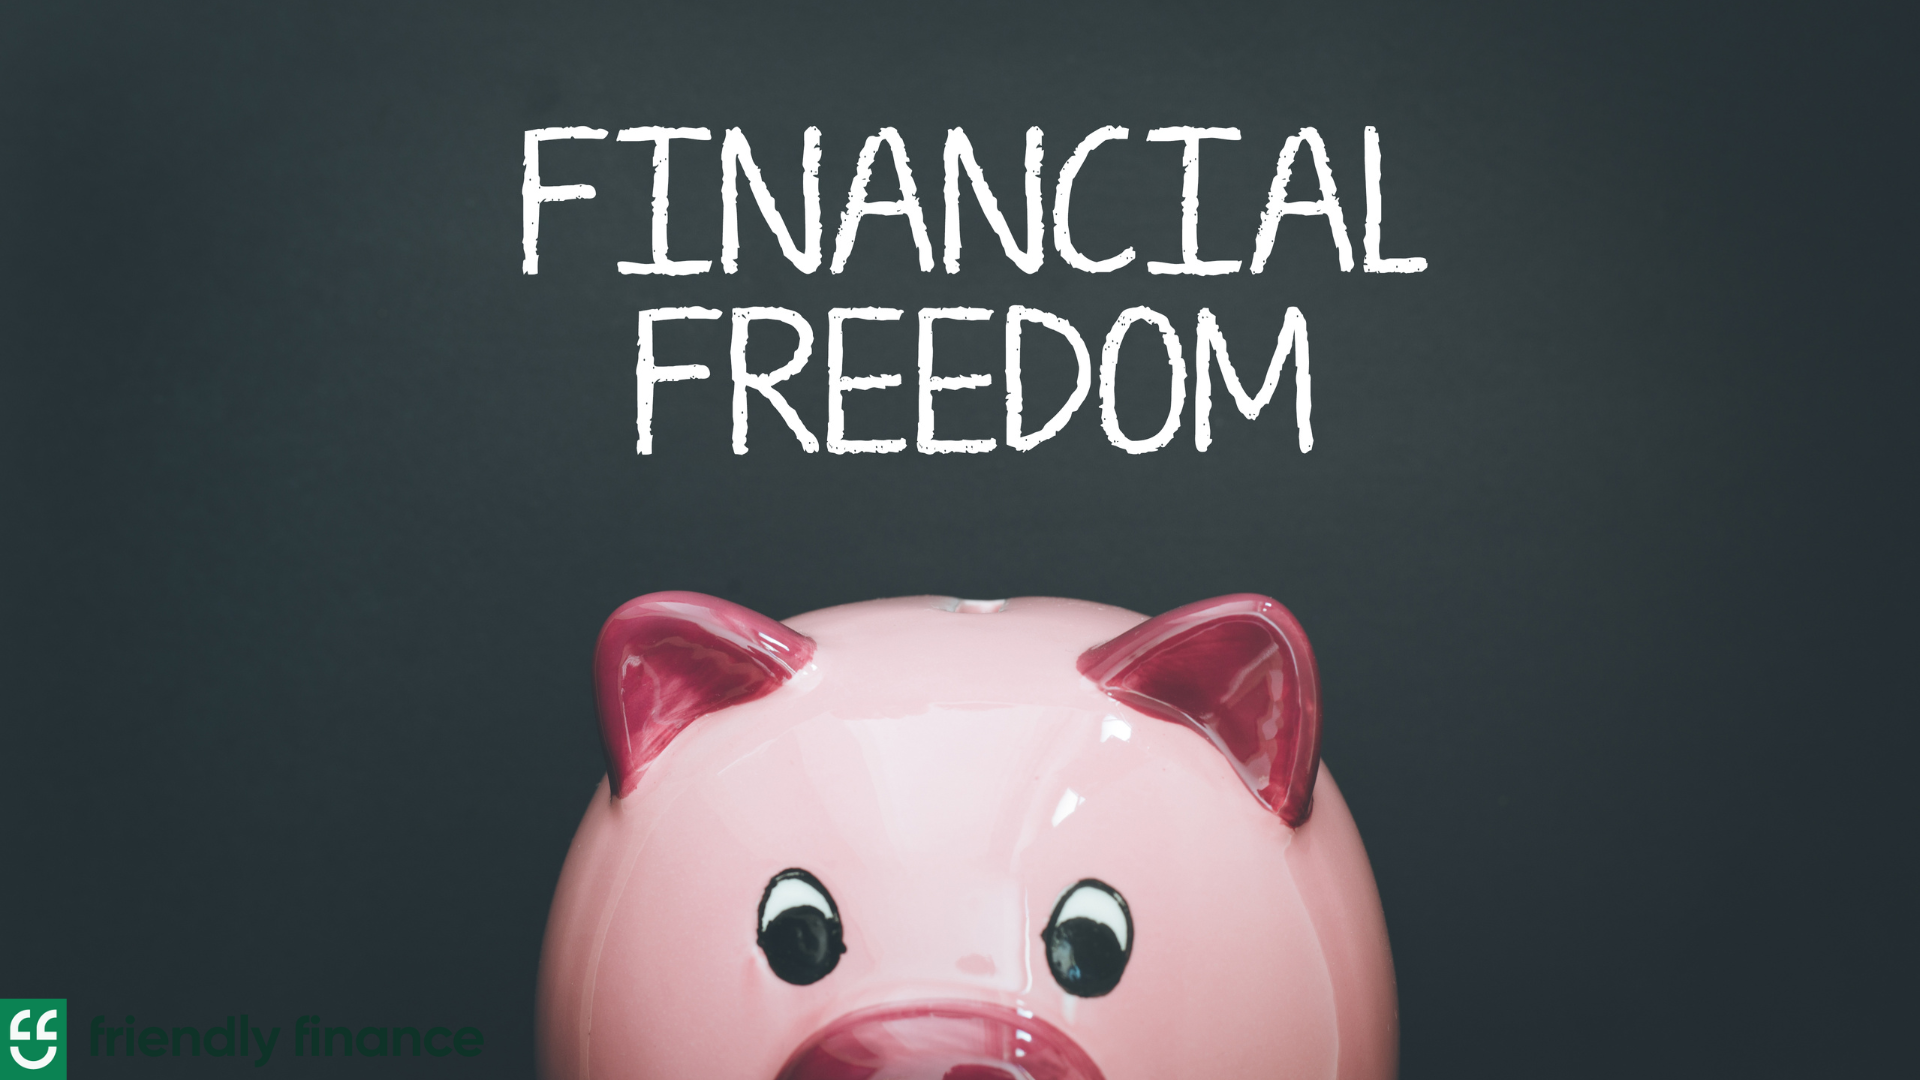 A piggy bank with "financial freedom" written above it